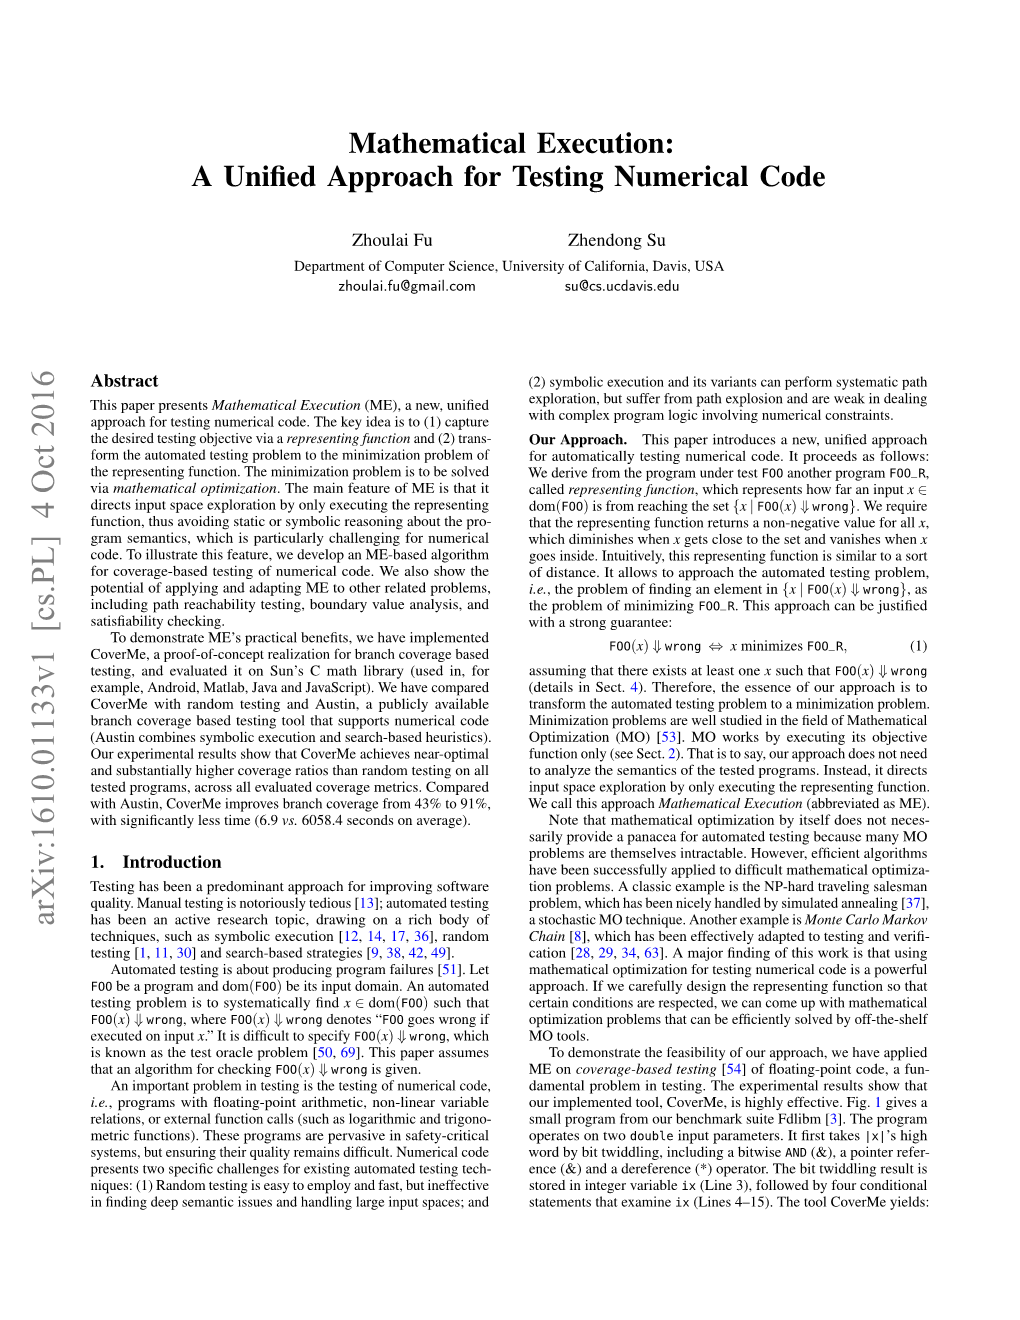 Mathematical Execution: a Unified Approach for Testing Numerical Code